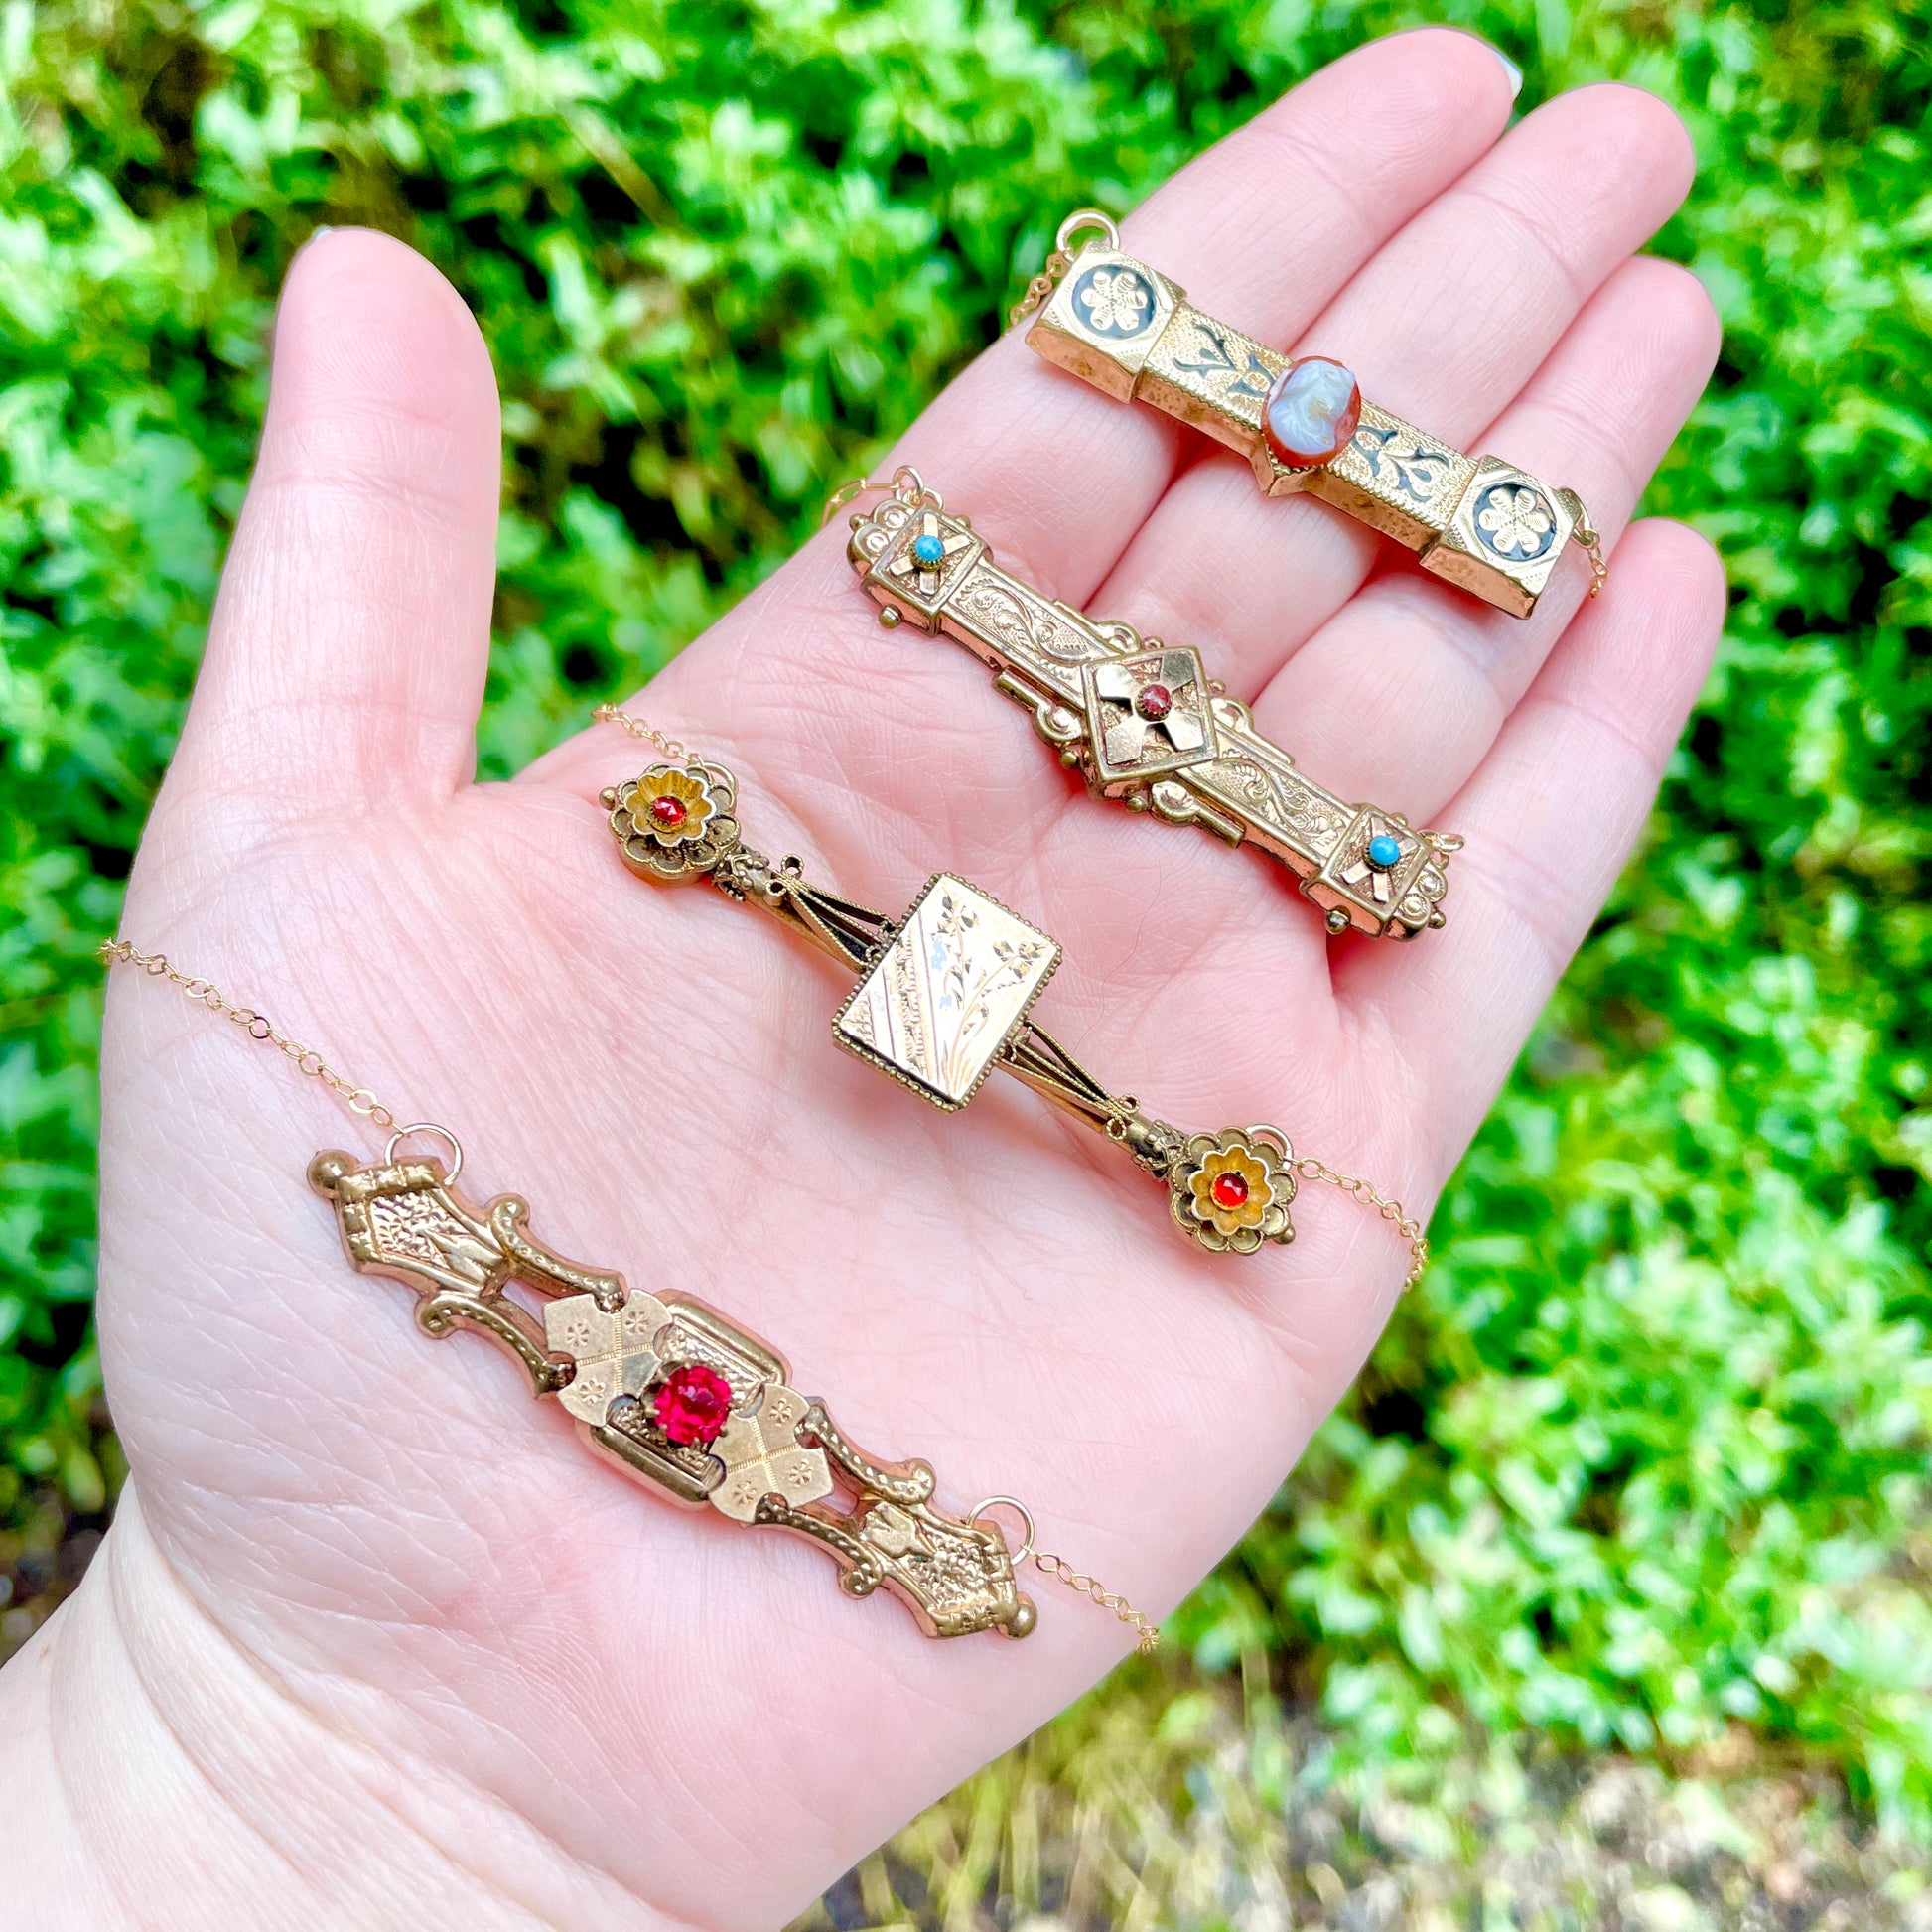 Three repurposed antique Victorian/Edwardian bar pin pendants laying on the palm side of a hand with green foliage in the background.